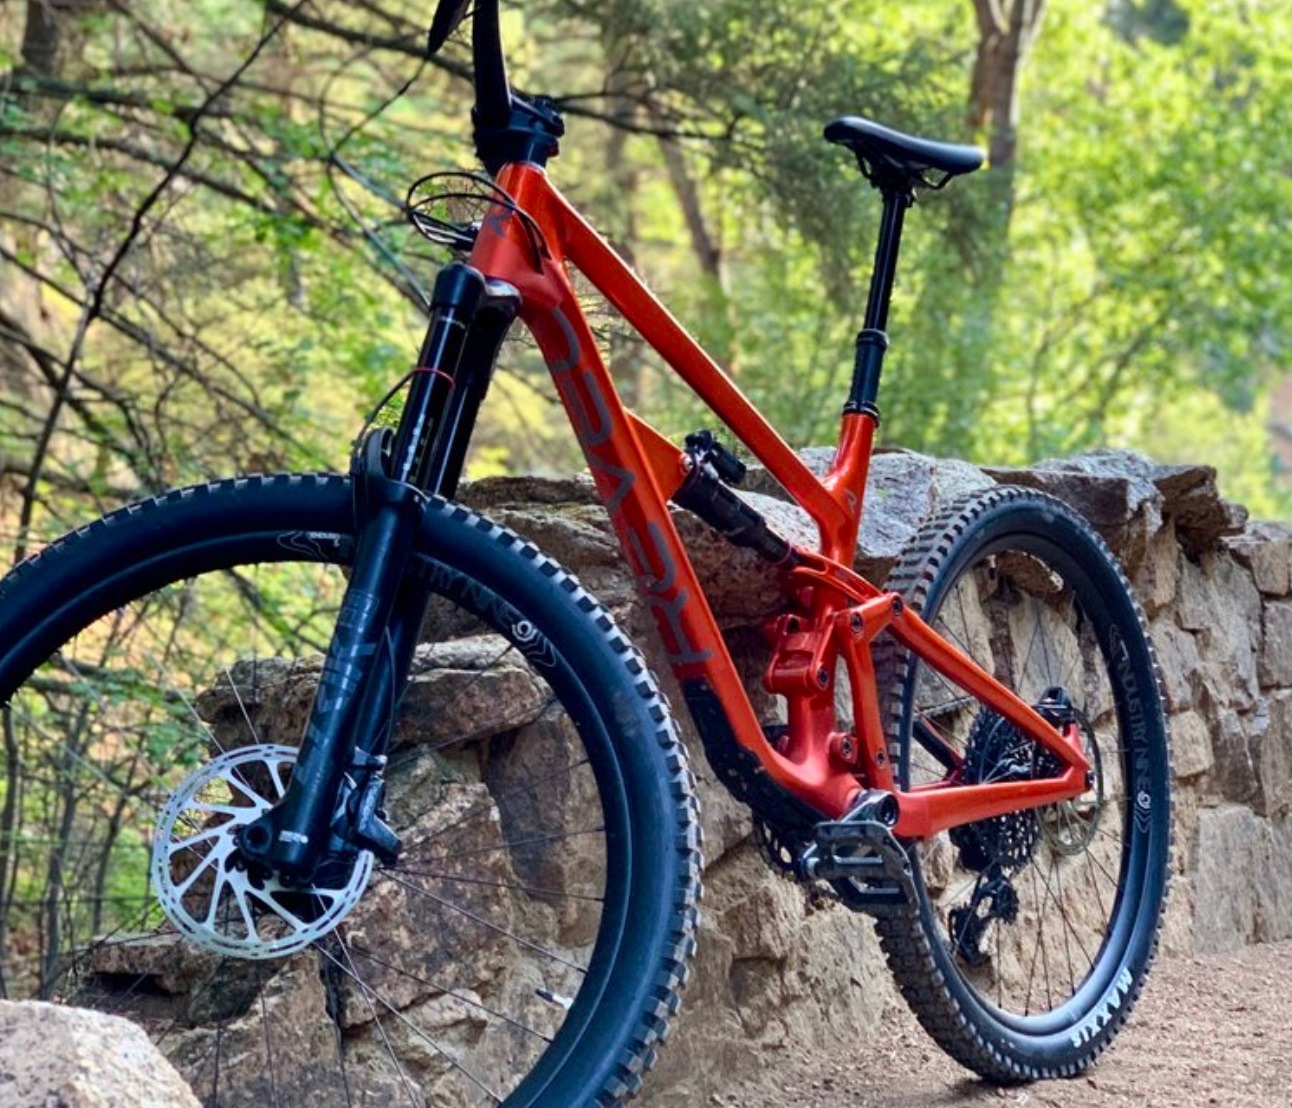 revel bikes ready to rent all year long in colorado springs